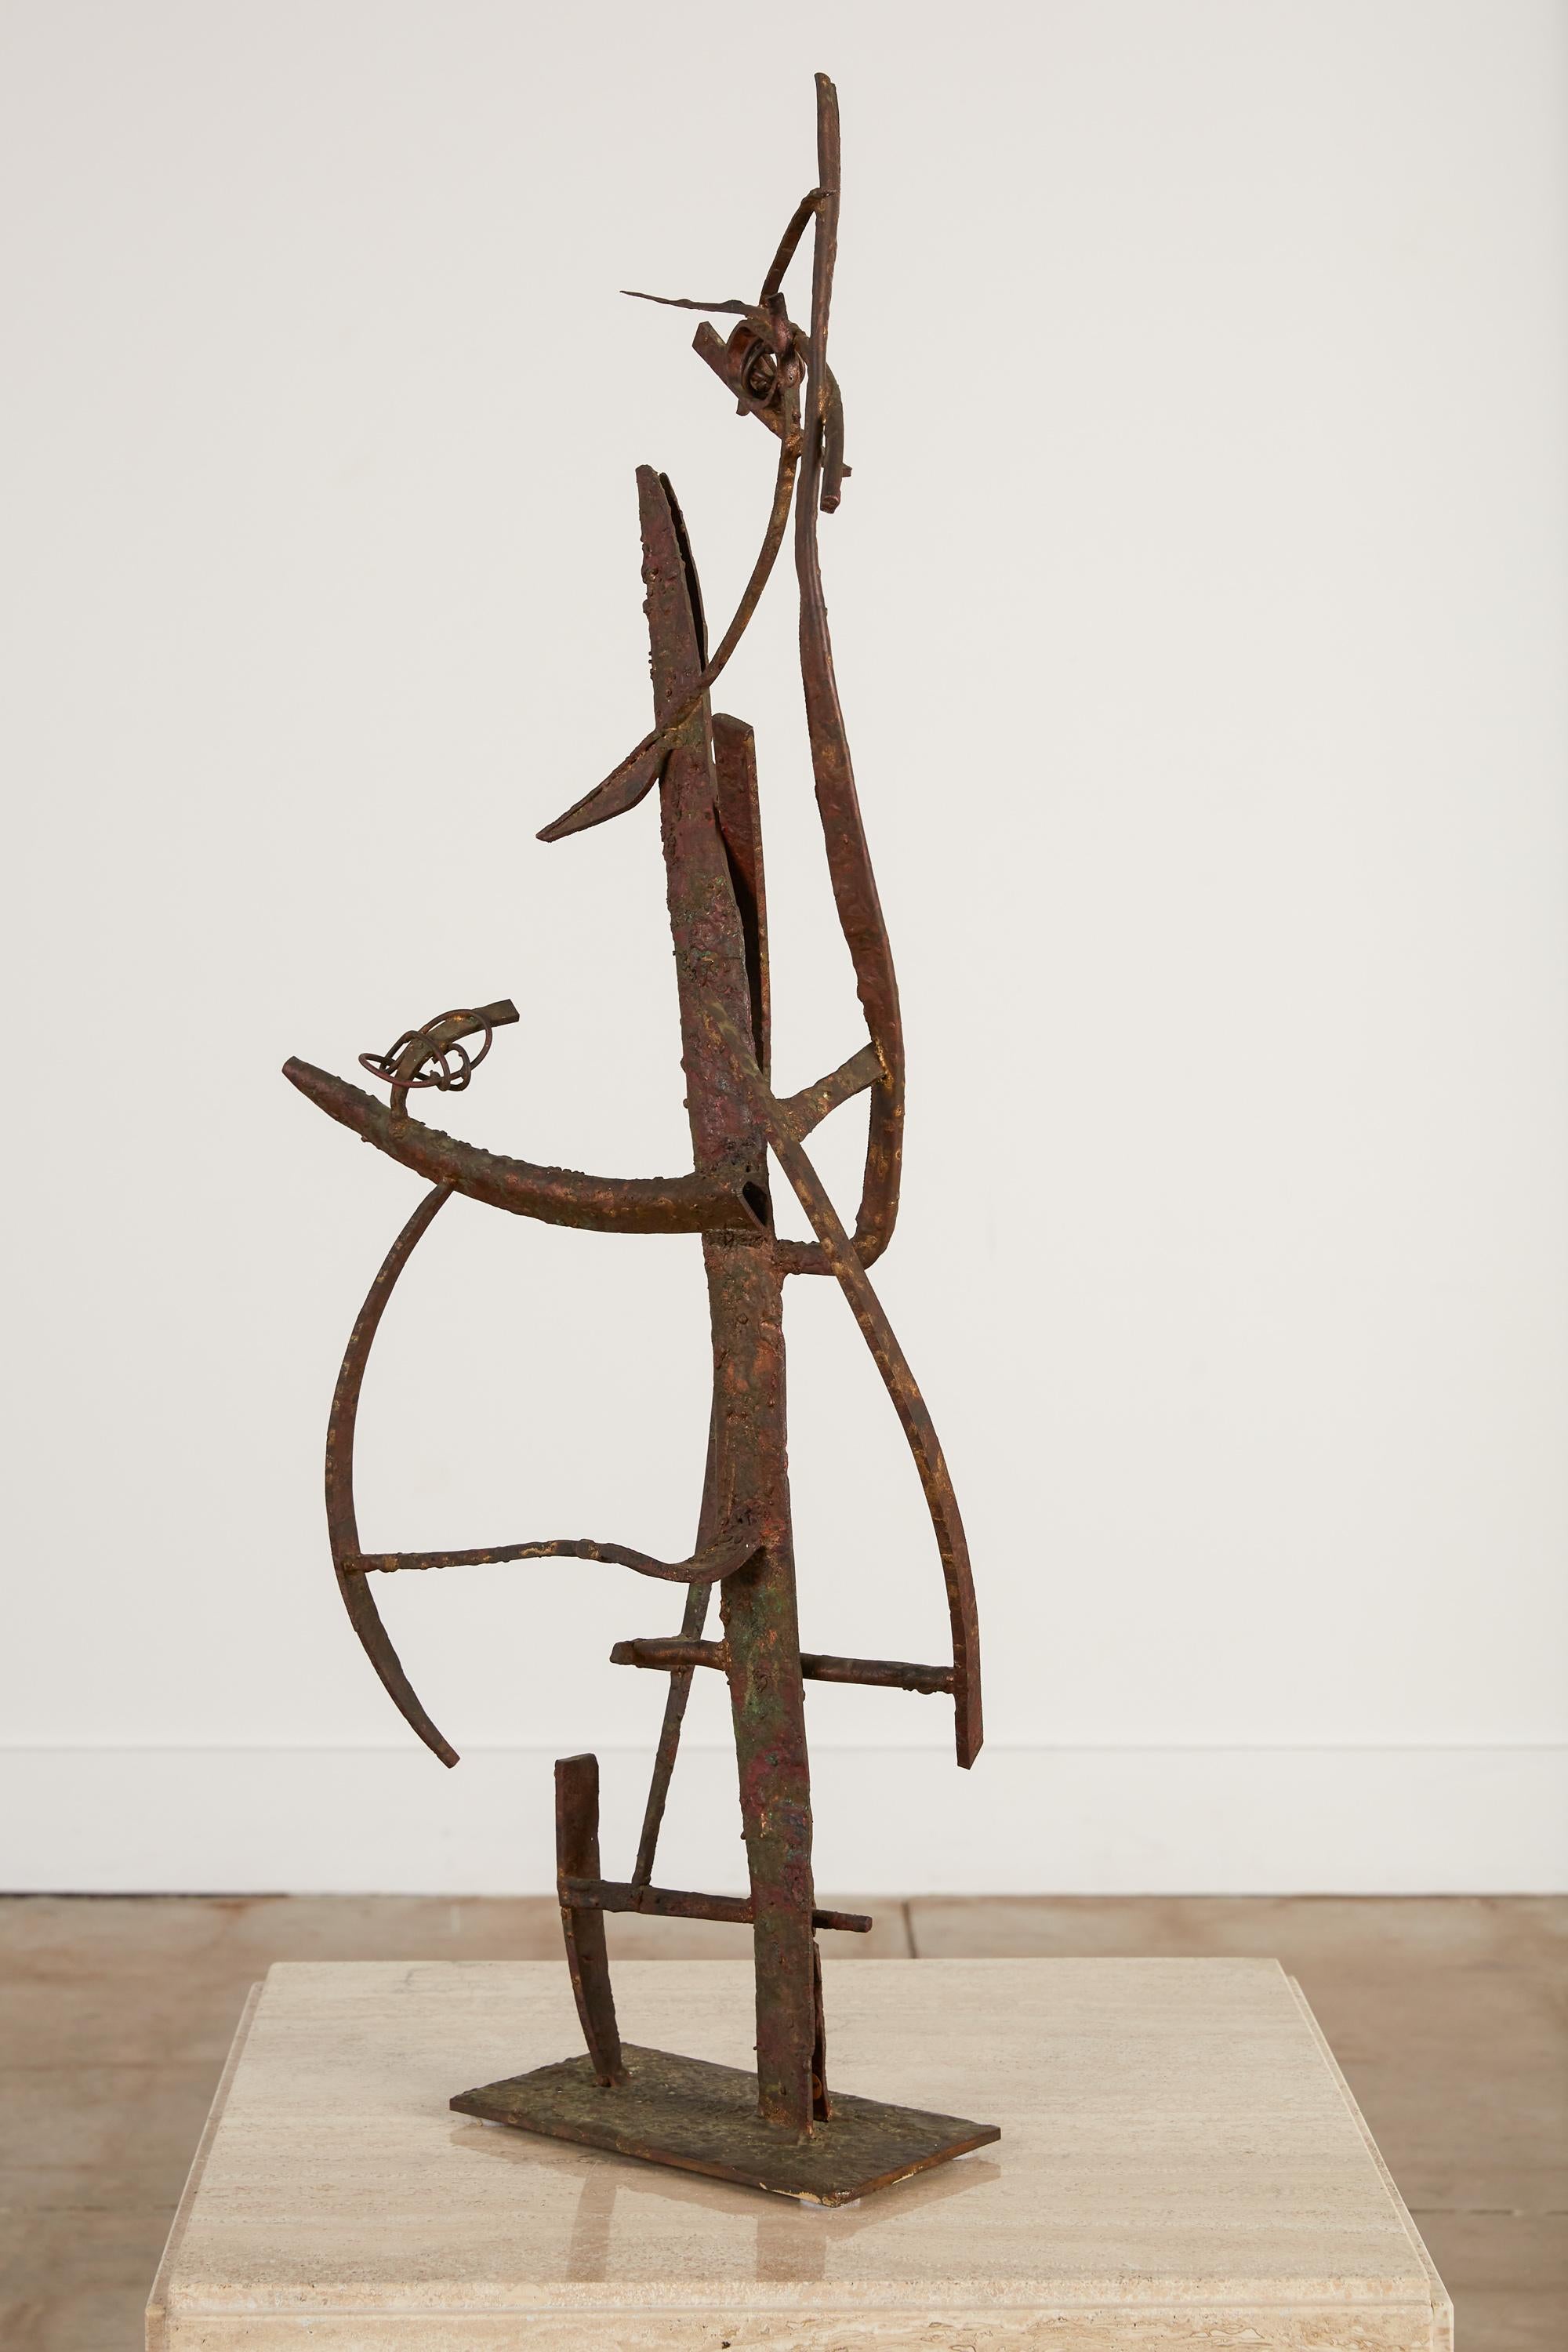 A large 1958 sculpture in welded steel, brass, bronze, and copper on a small plate mount by California-based artist Max Finkelstein. Entitled “Jacob’s Ladder,” the piece displays Finkelstein’s signature Kinetic energy and playful use of geometry.